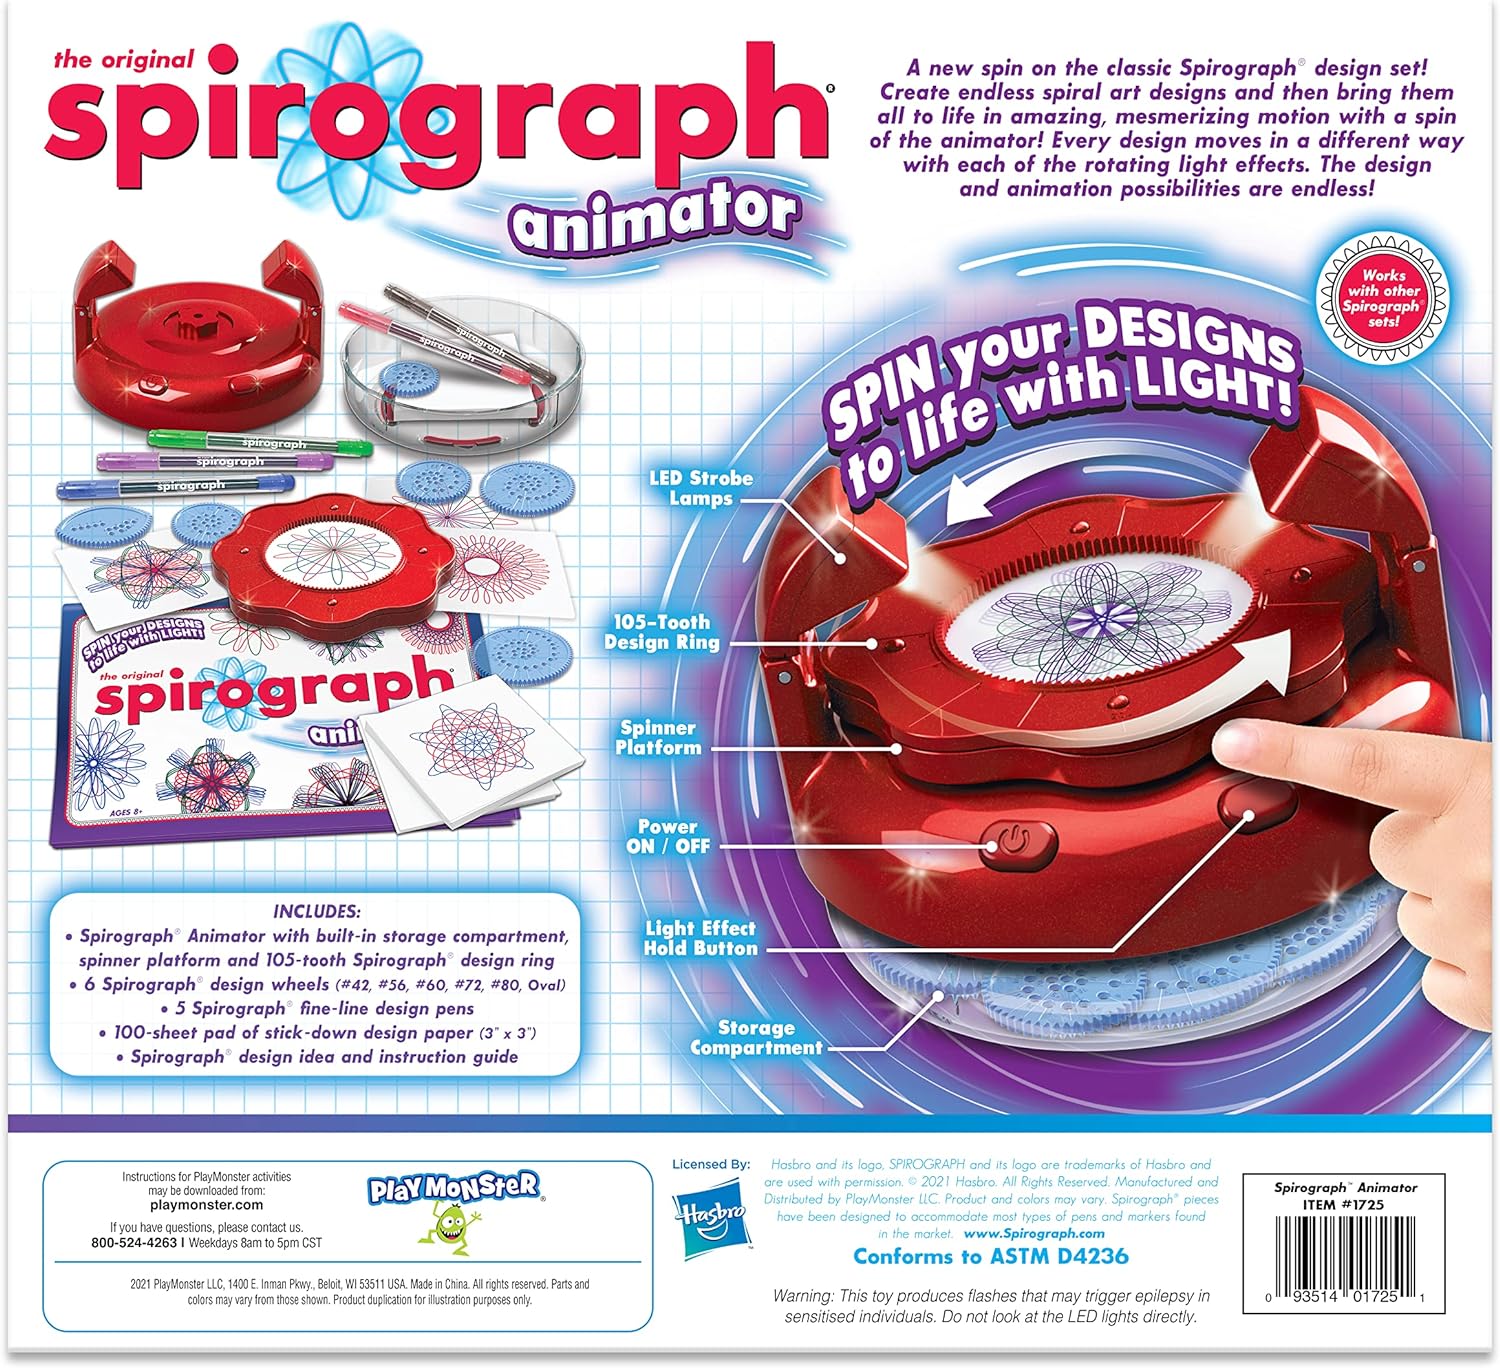 Spirograph ANIMATOR Create Amazing 3D Designs With Lights & Spinning Action